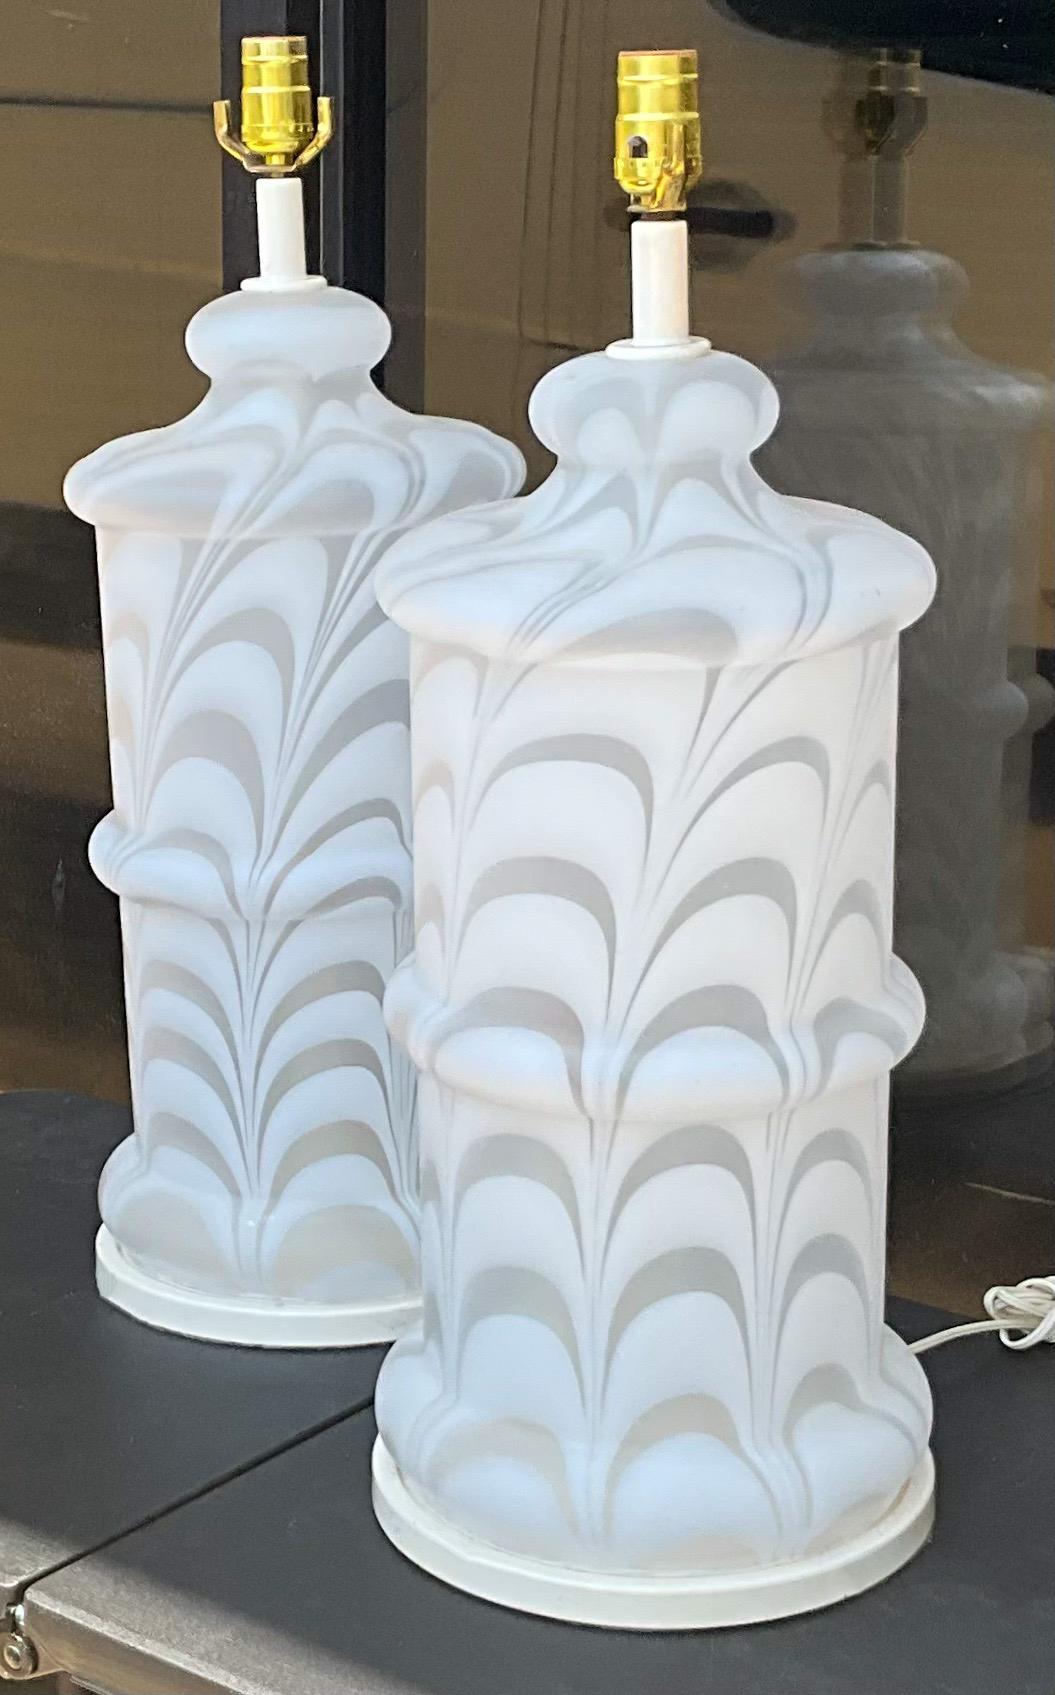 1970s Modern Monumental Mazzega Style Swirled Murano Glass Table Lamps - Pair In Good Condition For Sale In Kennesaw, GA